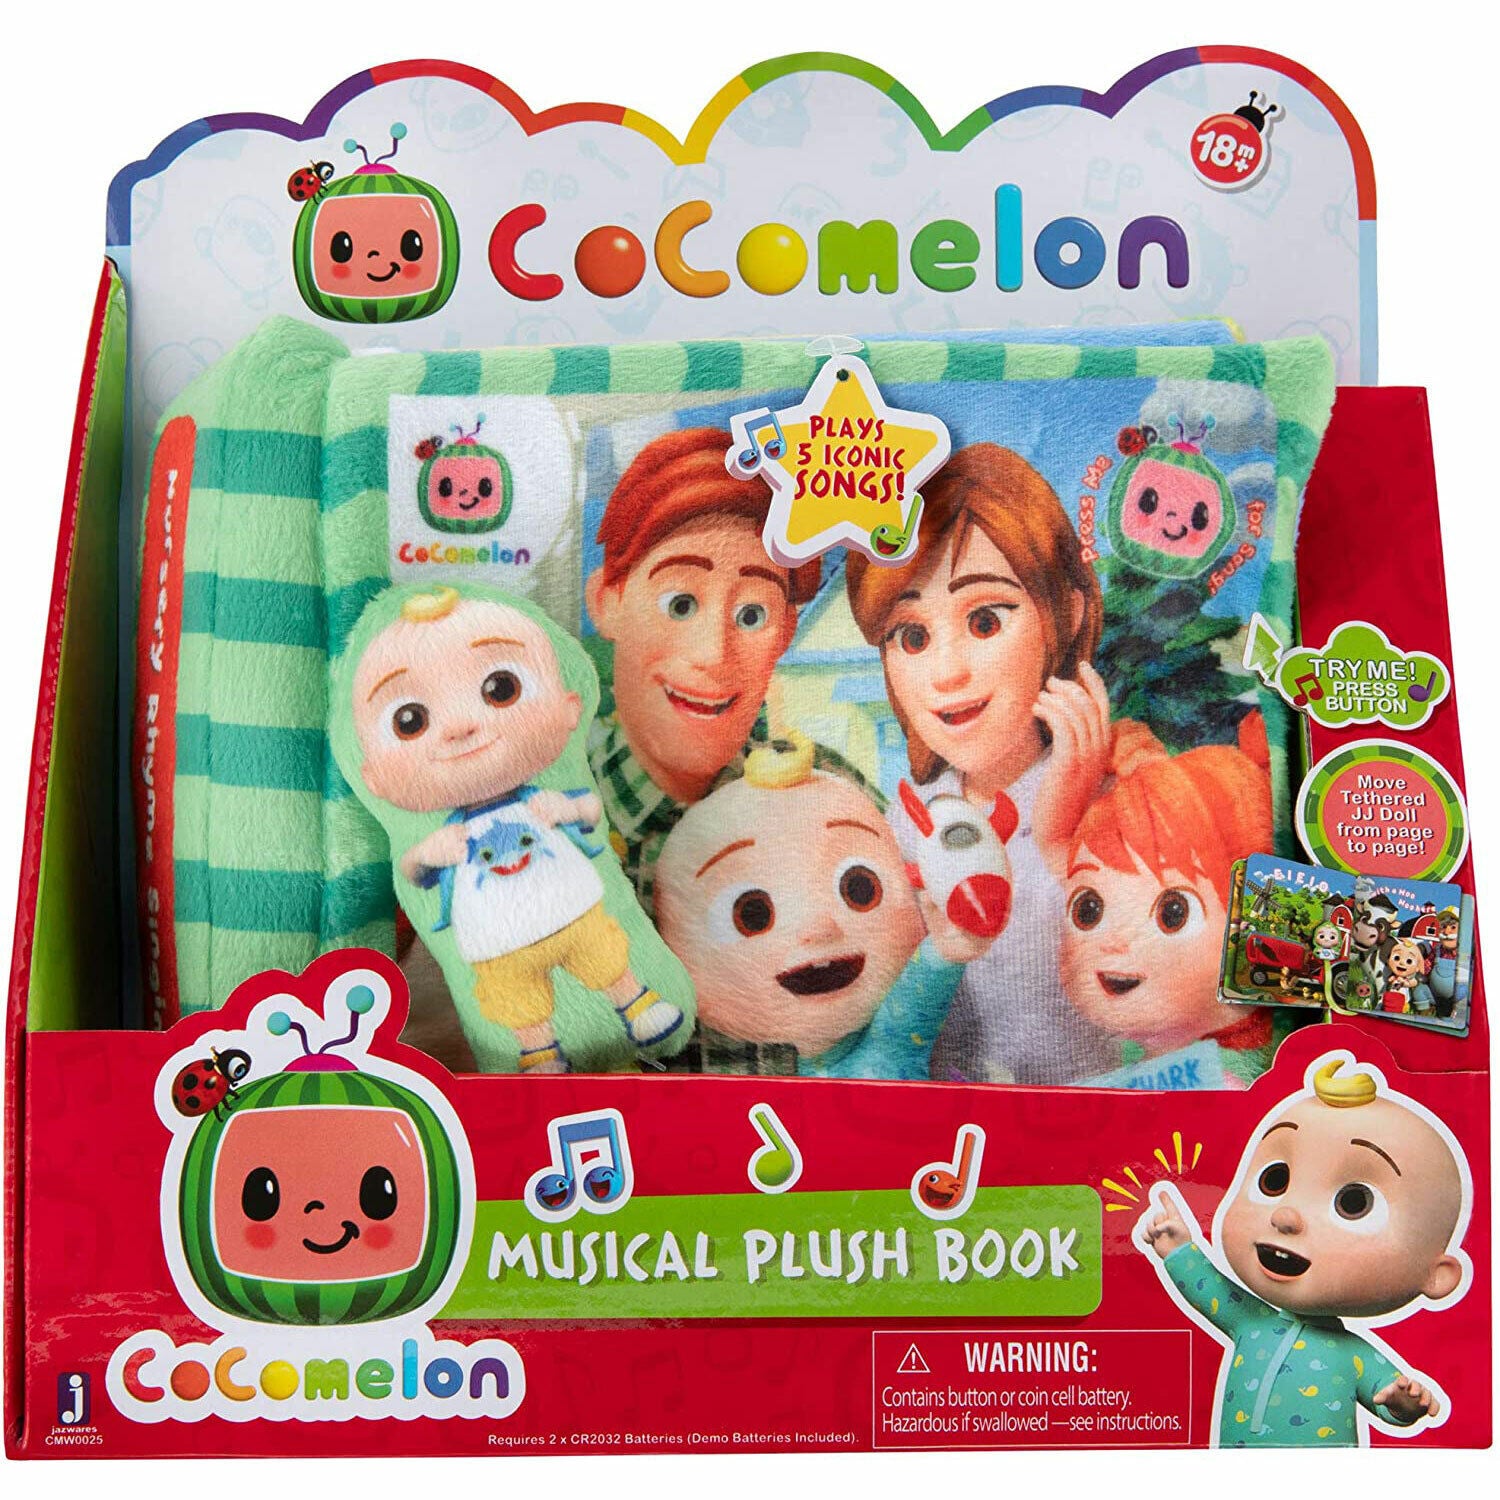 Cocomelon Singing Time Plush Book - Nursery Rhyme Musical Toy - BRAND NEW